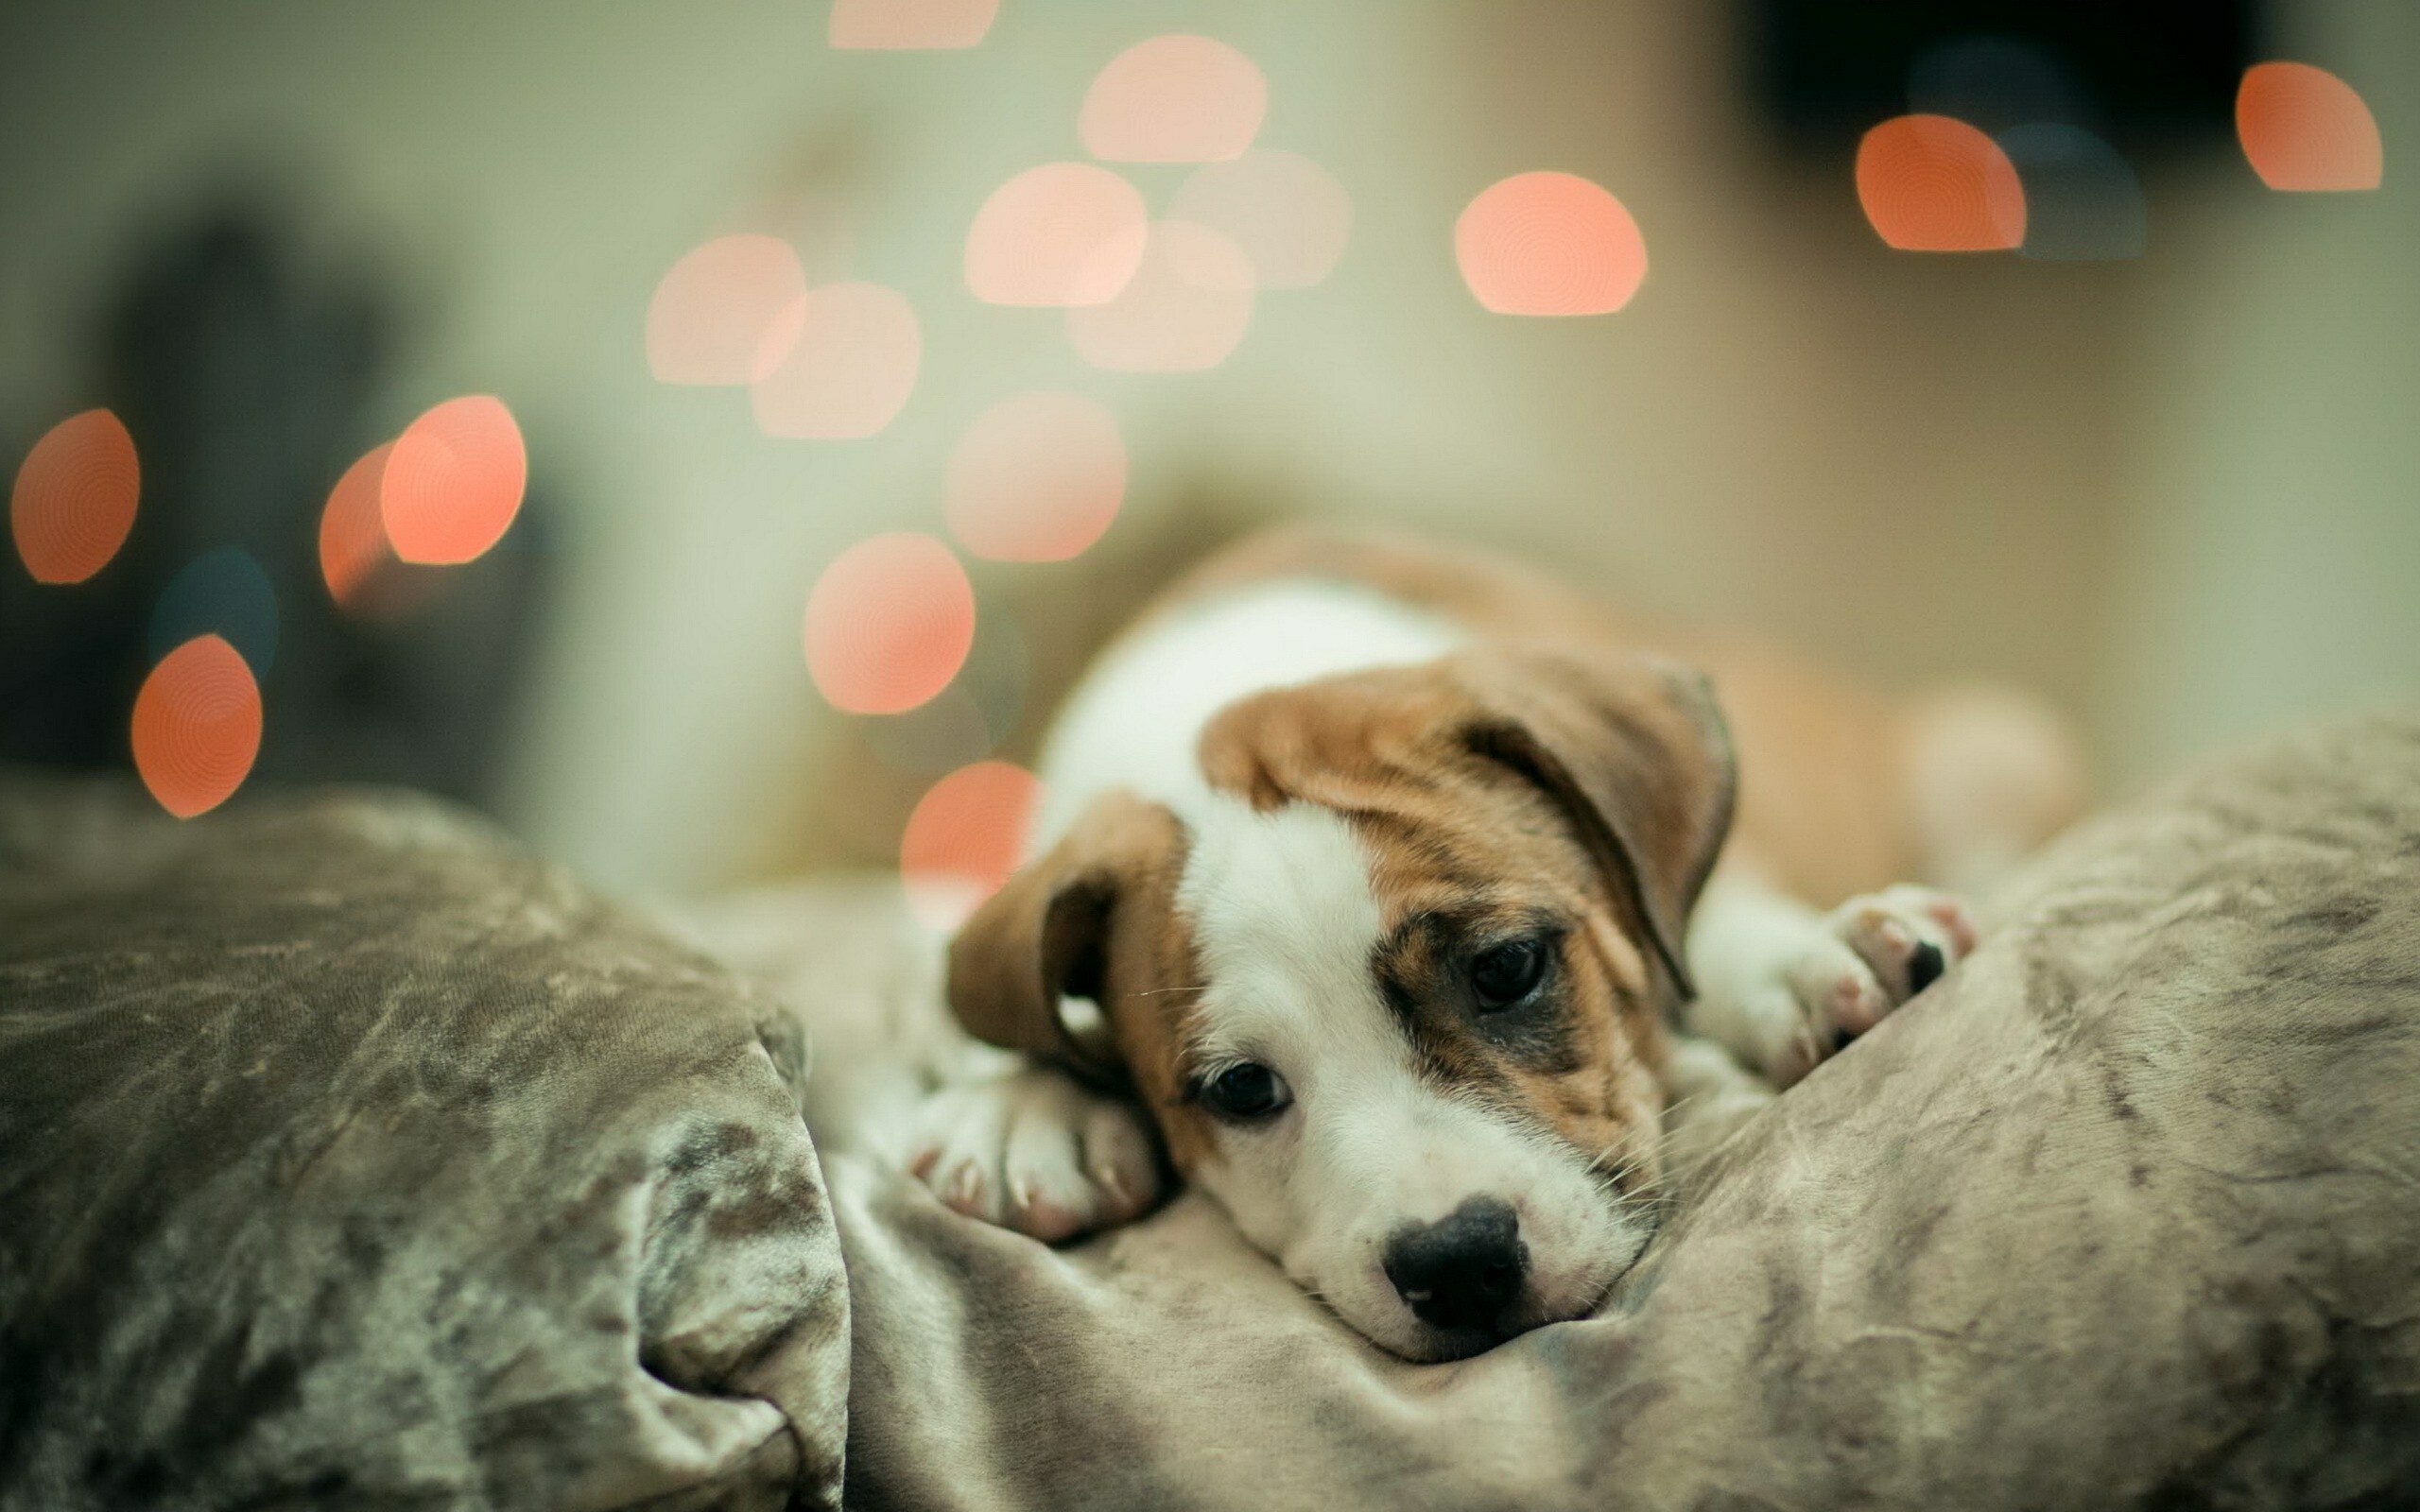 Puppy: Puppies, born after an average of 63 days of gestation. 2560x1600 HD Wallpaper.